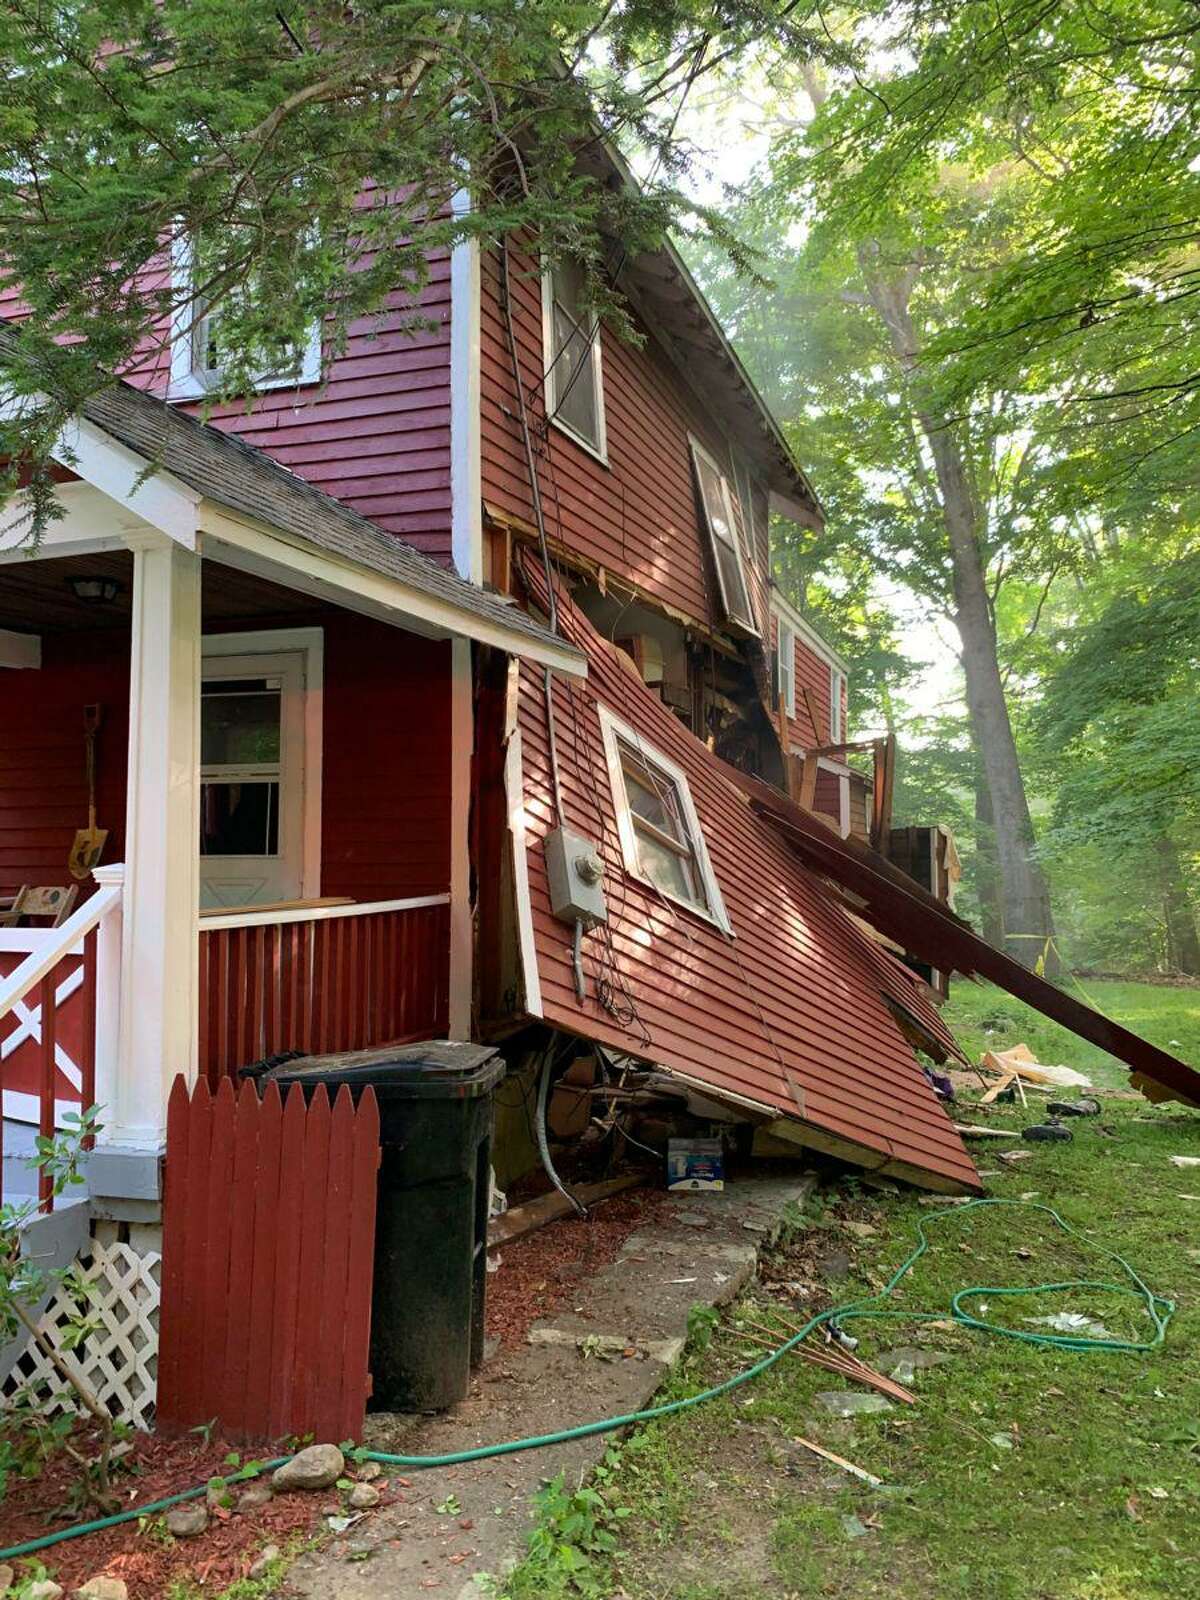 The house at 105 Woodbine Road in Stamford, Conn., partially collapsed after an explosion Saturday, June 20, 2020.